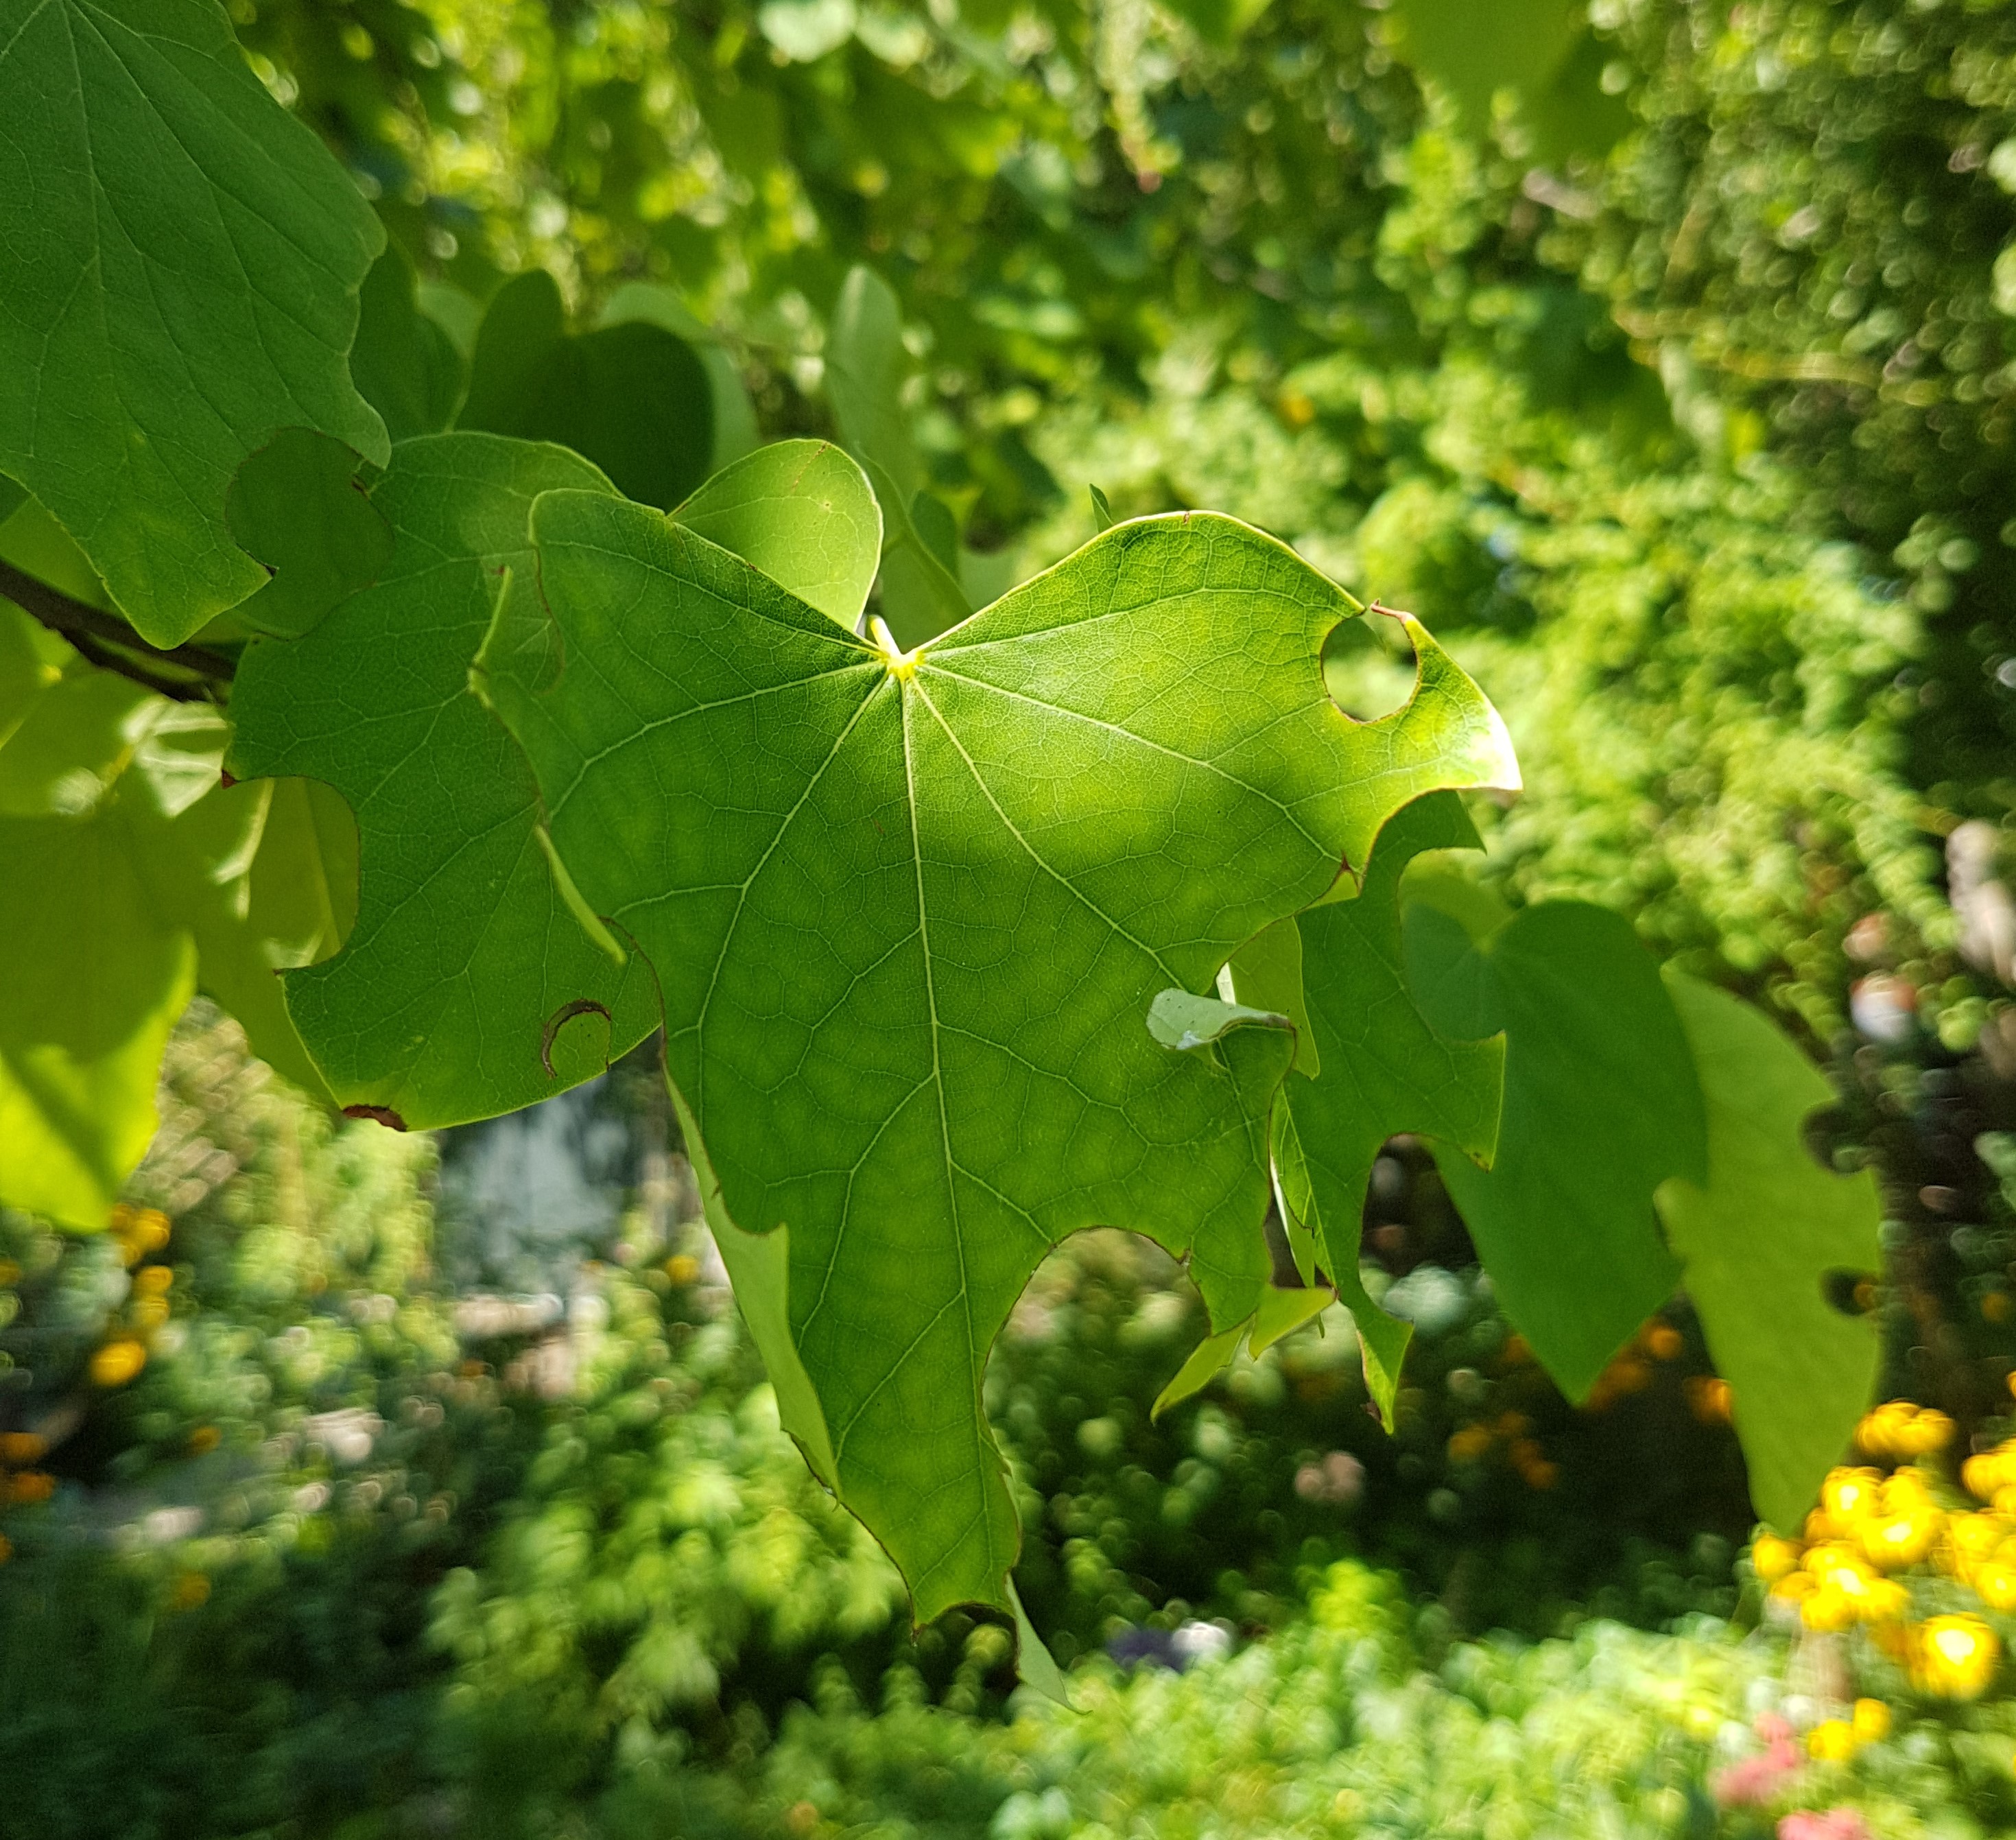 eastern redbud damaged by leafcutter bee